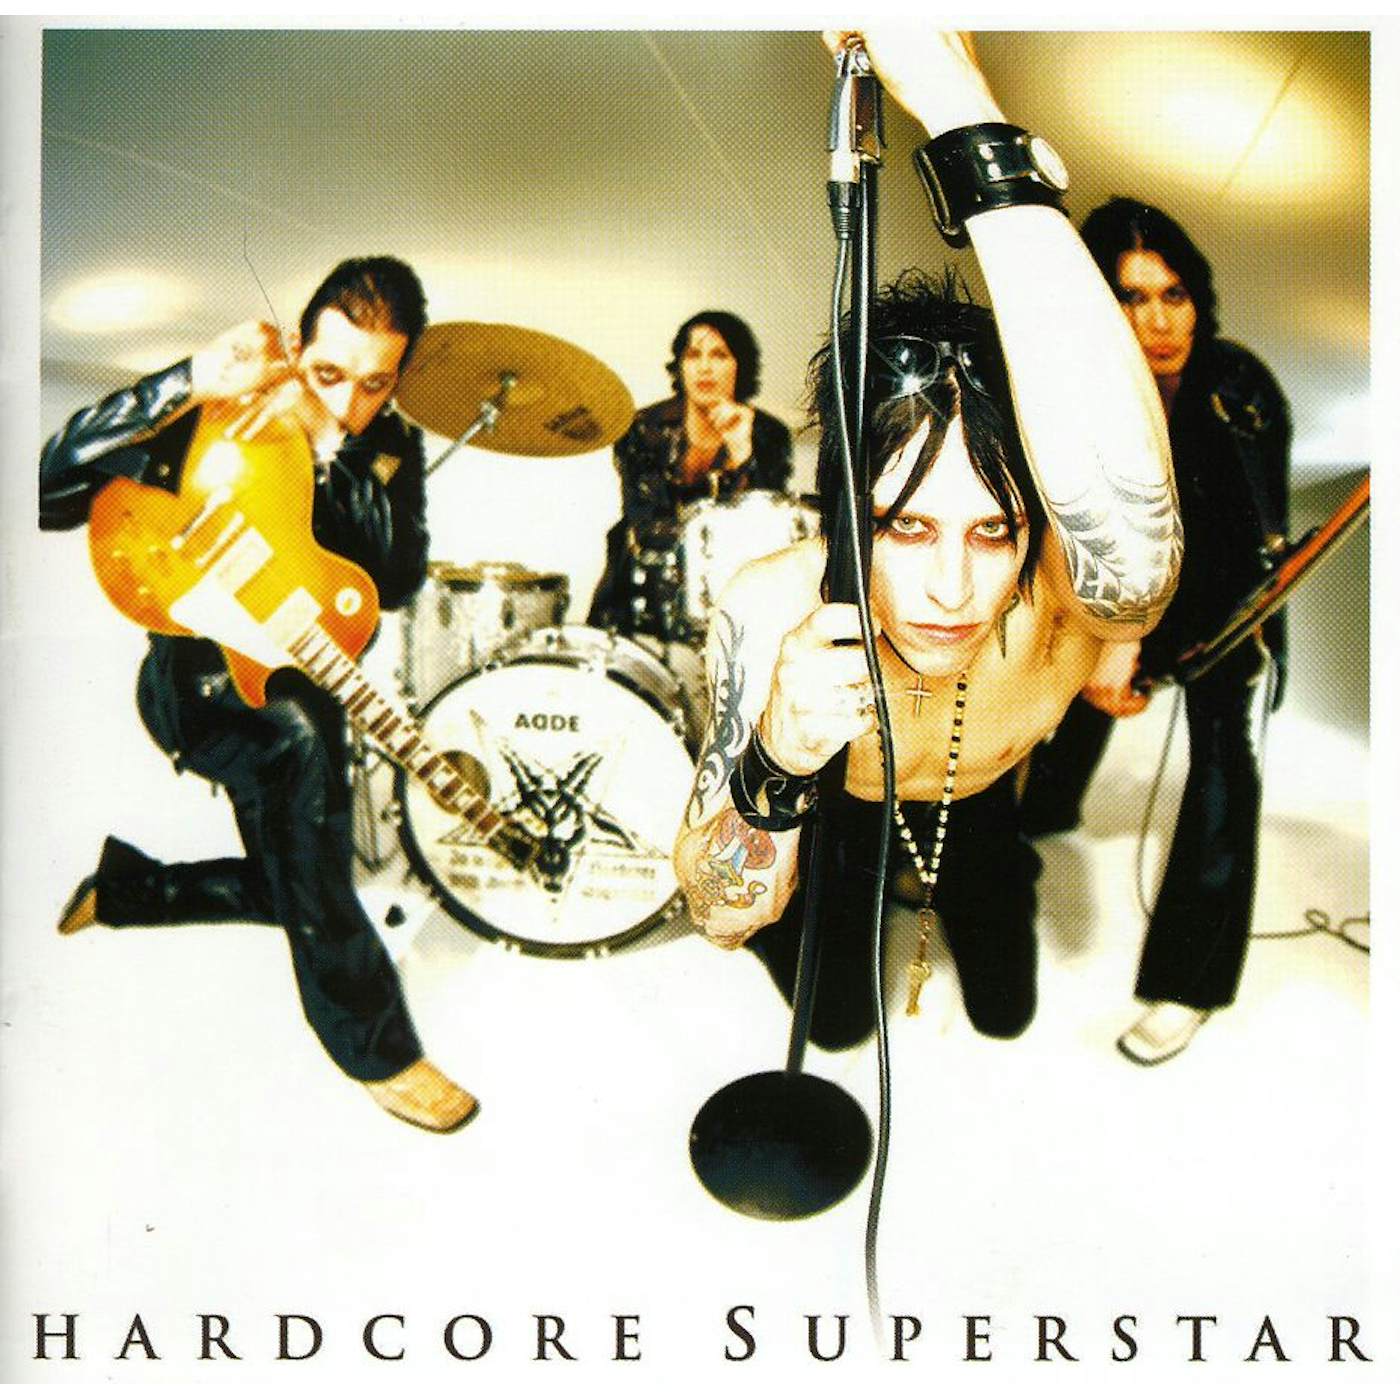 Hardcore Superstar THANK YOU (FOR LETTING US BE OURSELVES) CD